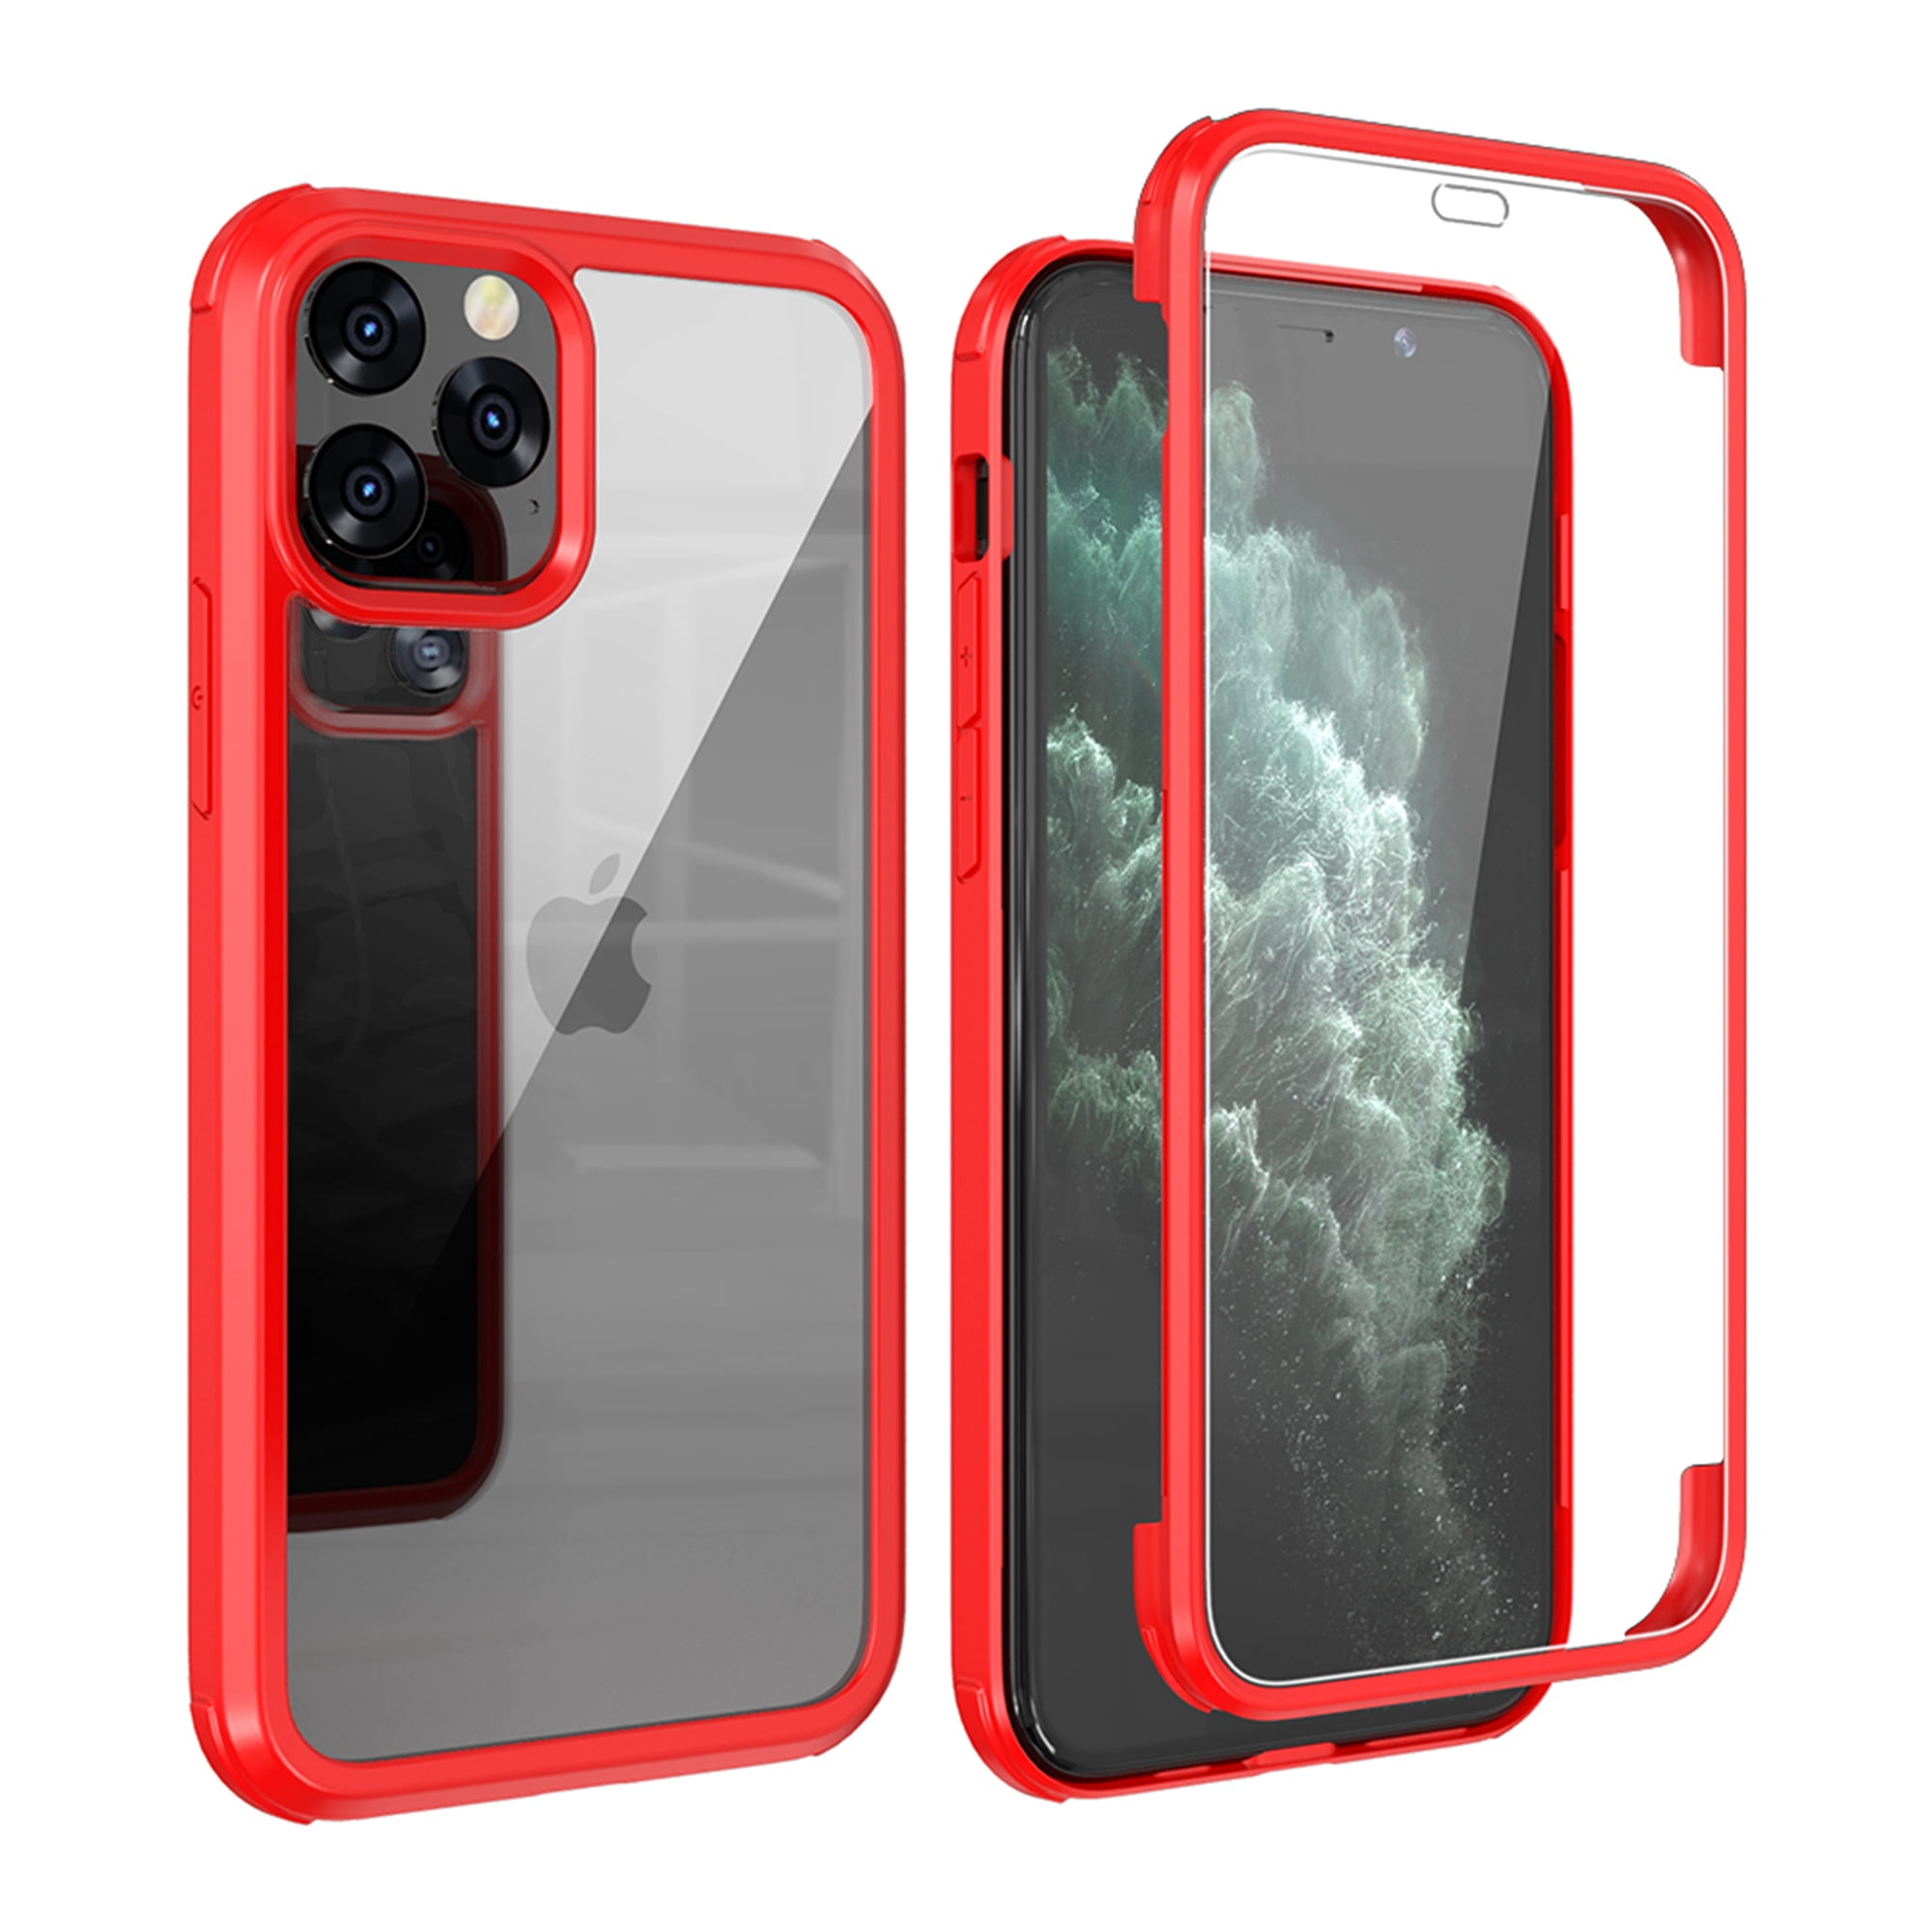 Dteck iPhone Xs Case, Dual Layer Full Body Shockproof Protection Case Double Sides Tempered Glass Cover Flexible TPU Bumper for iPhone Xs / iPhone X